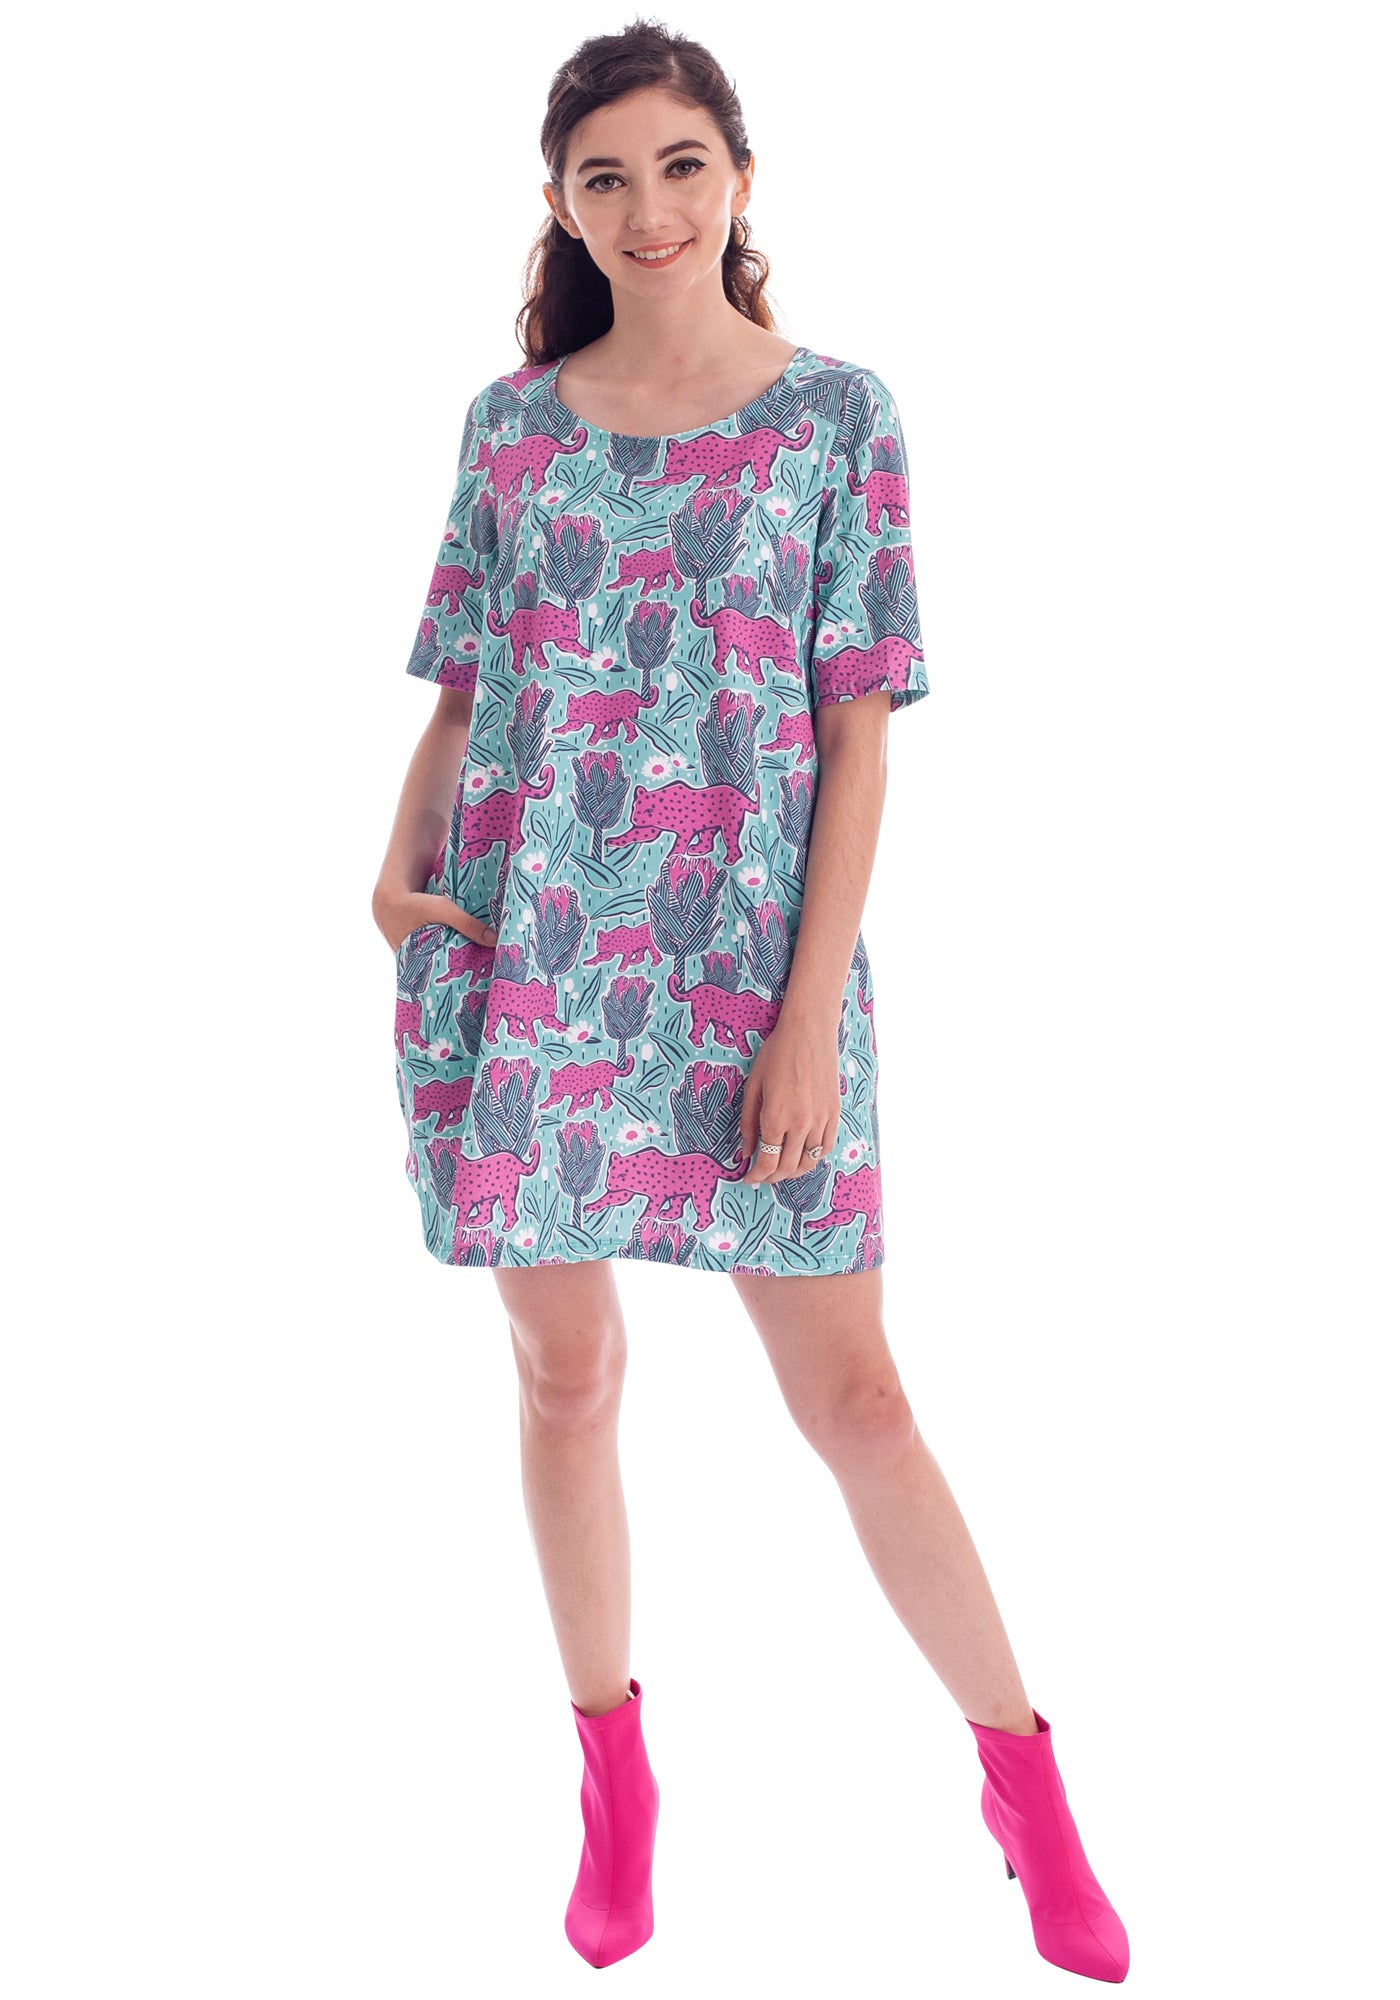 Model in mint green and pink pocket tunic with a print of protea flowers and jaguars